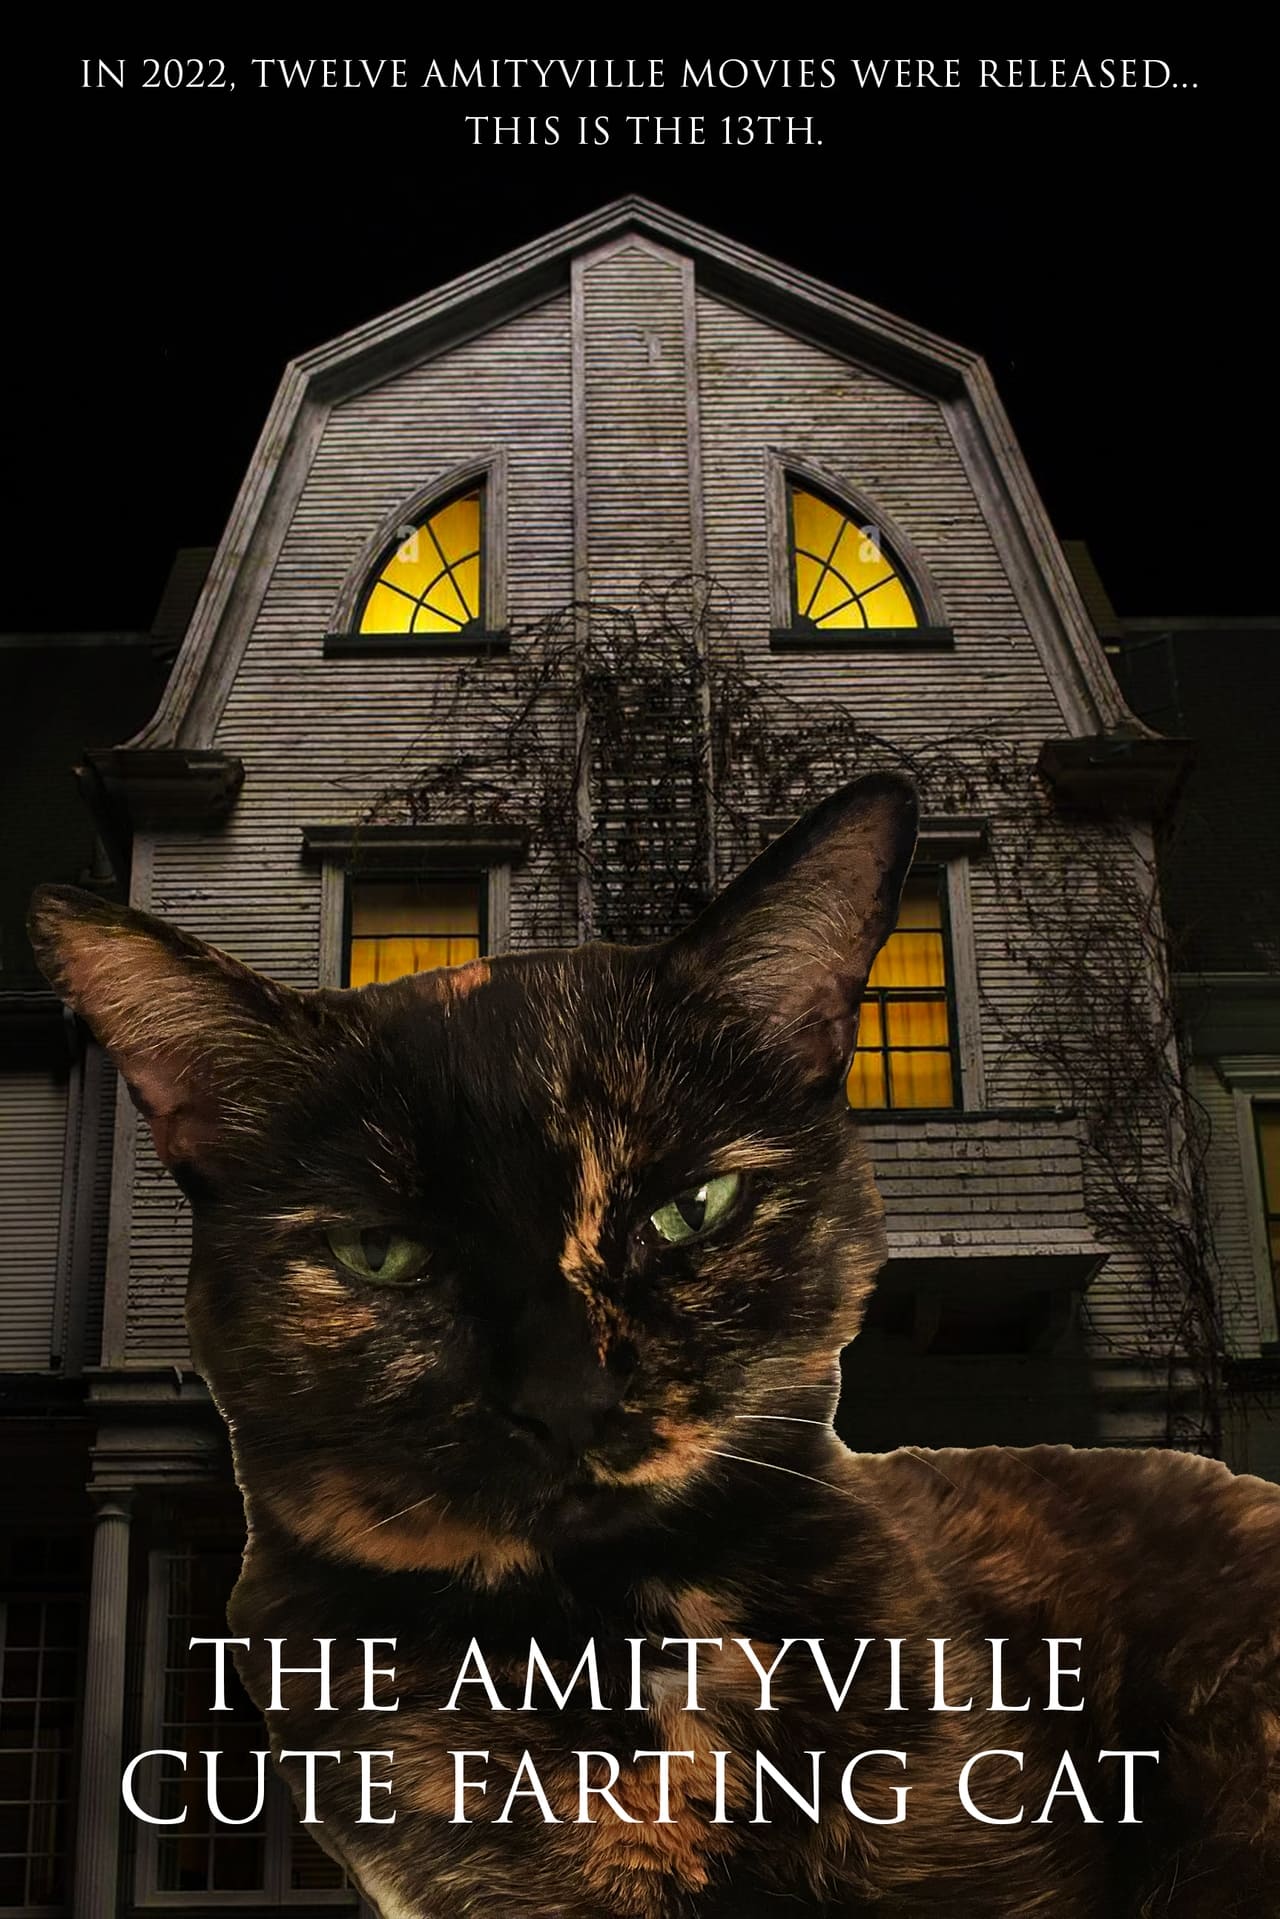 The Amityville Cute Farting Cat